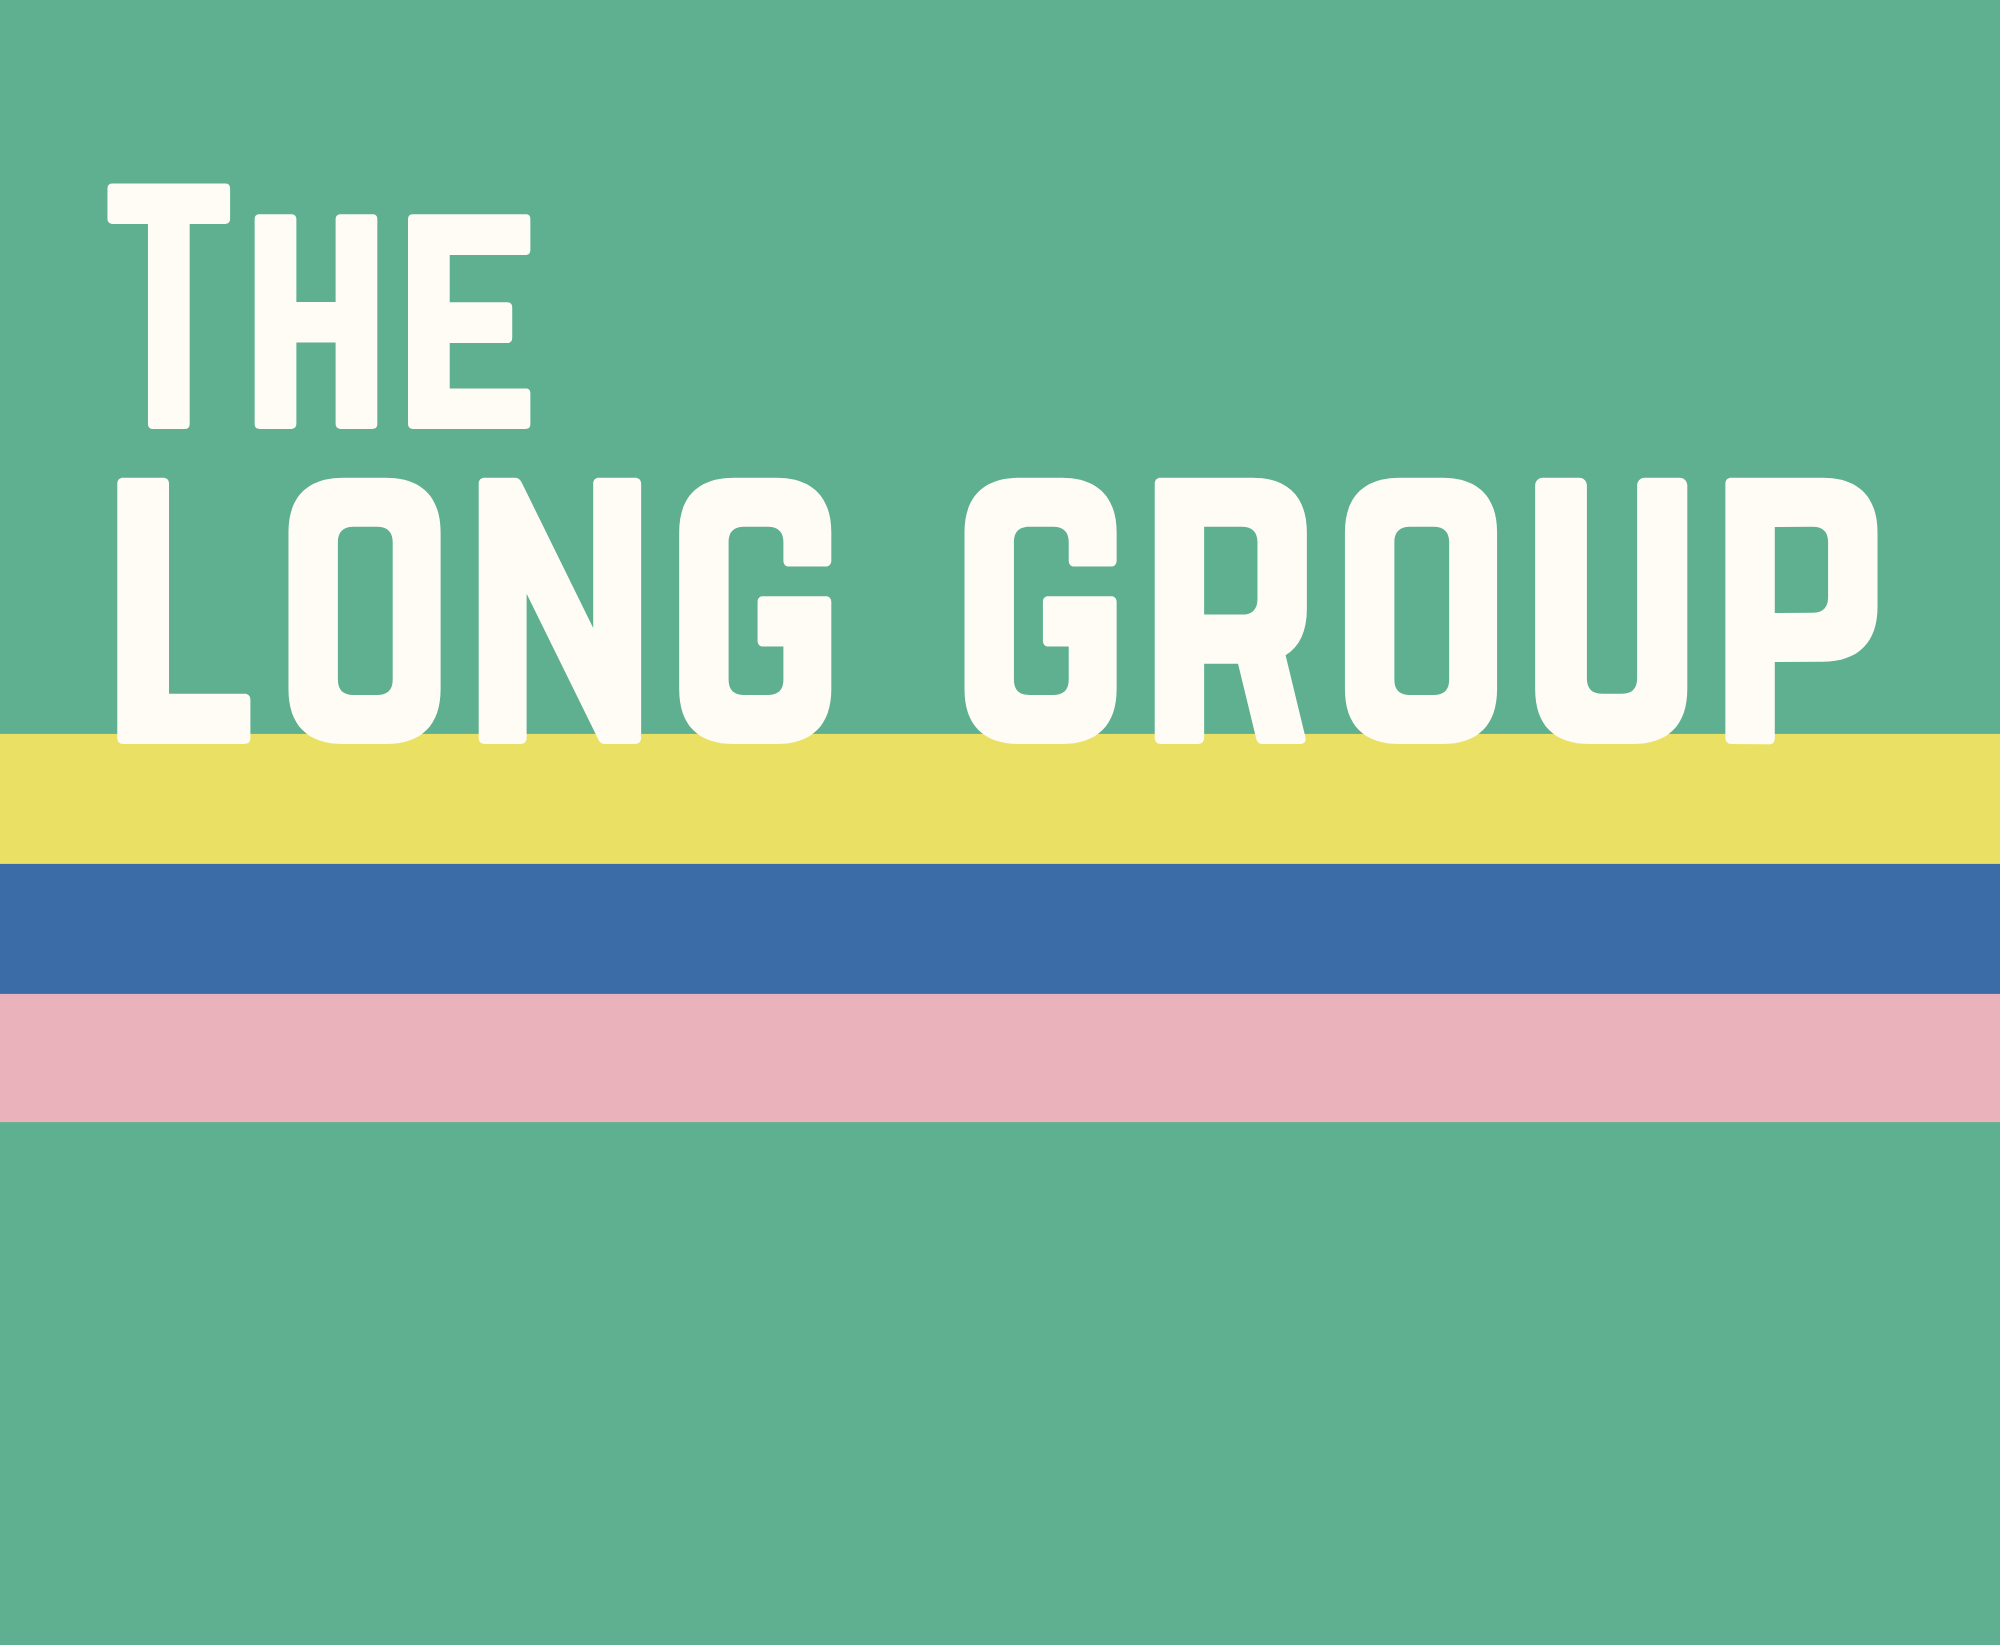 Text image says “The Long Group”